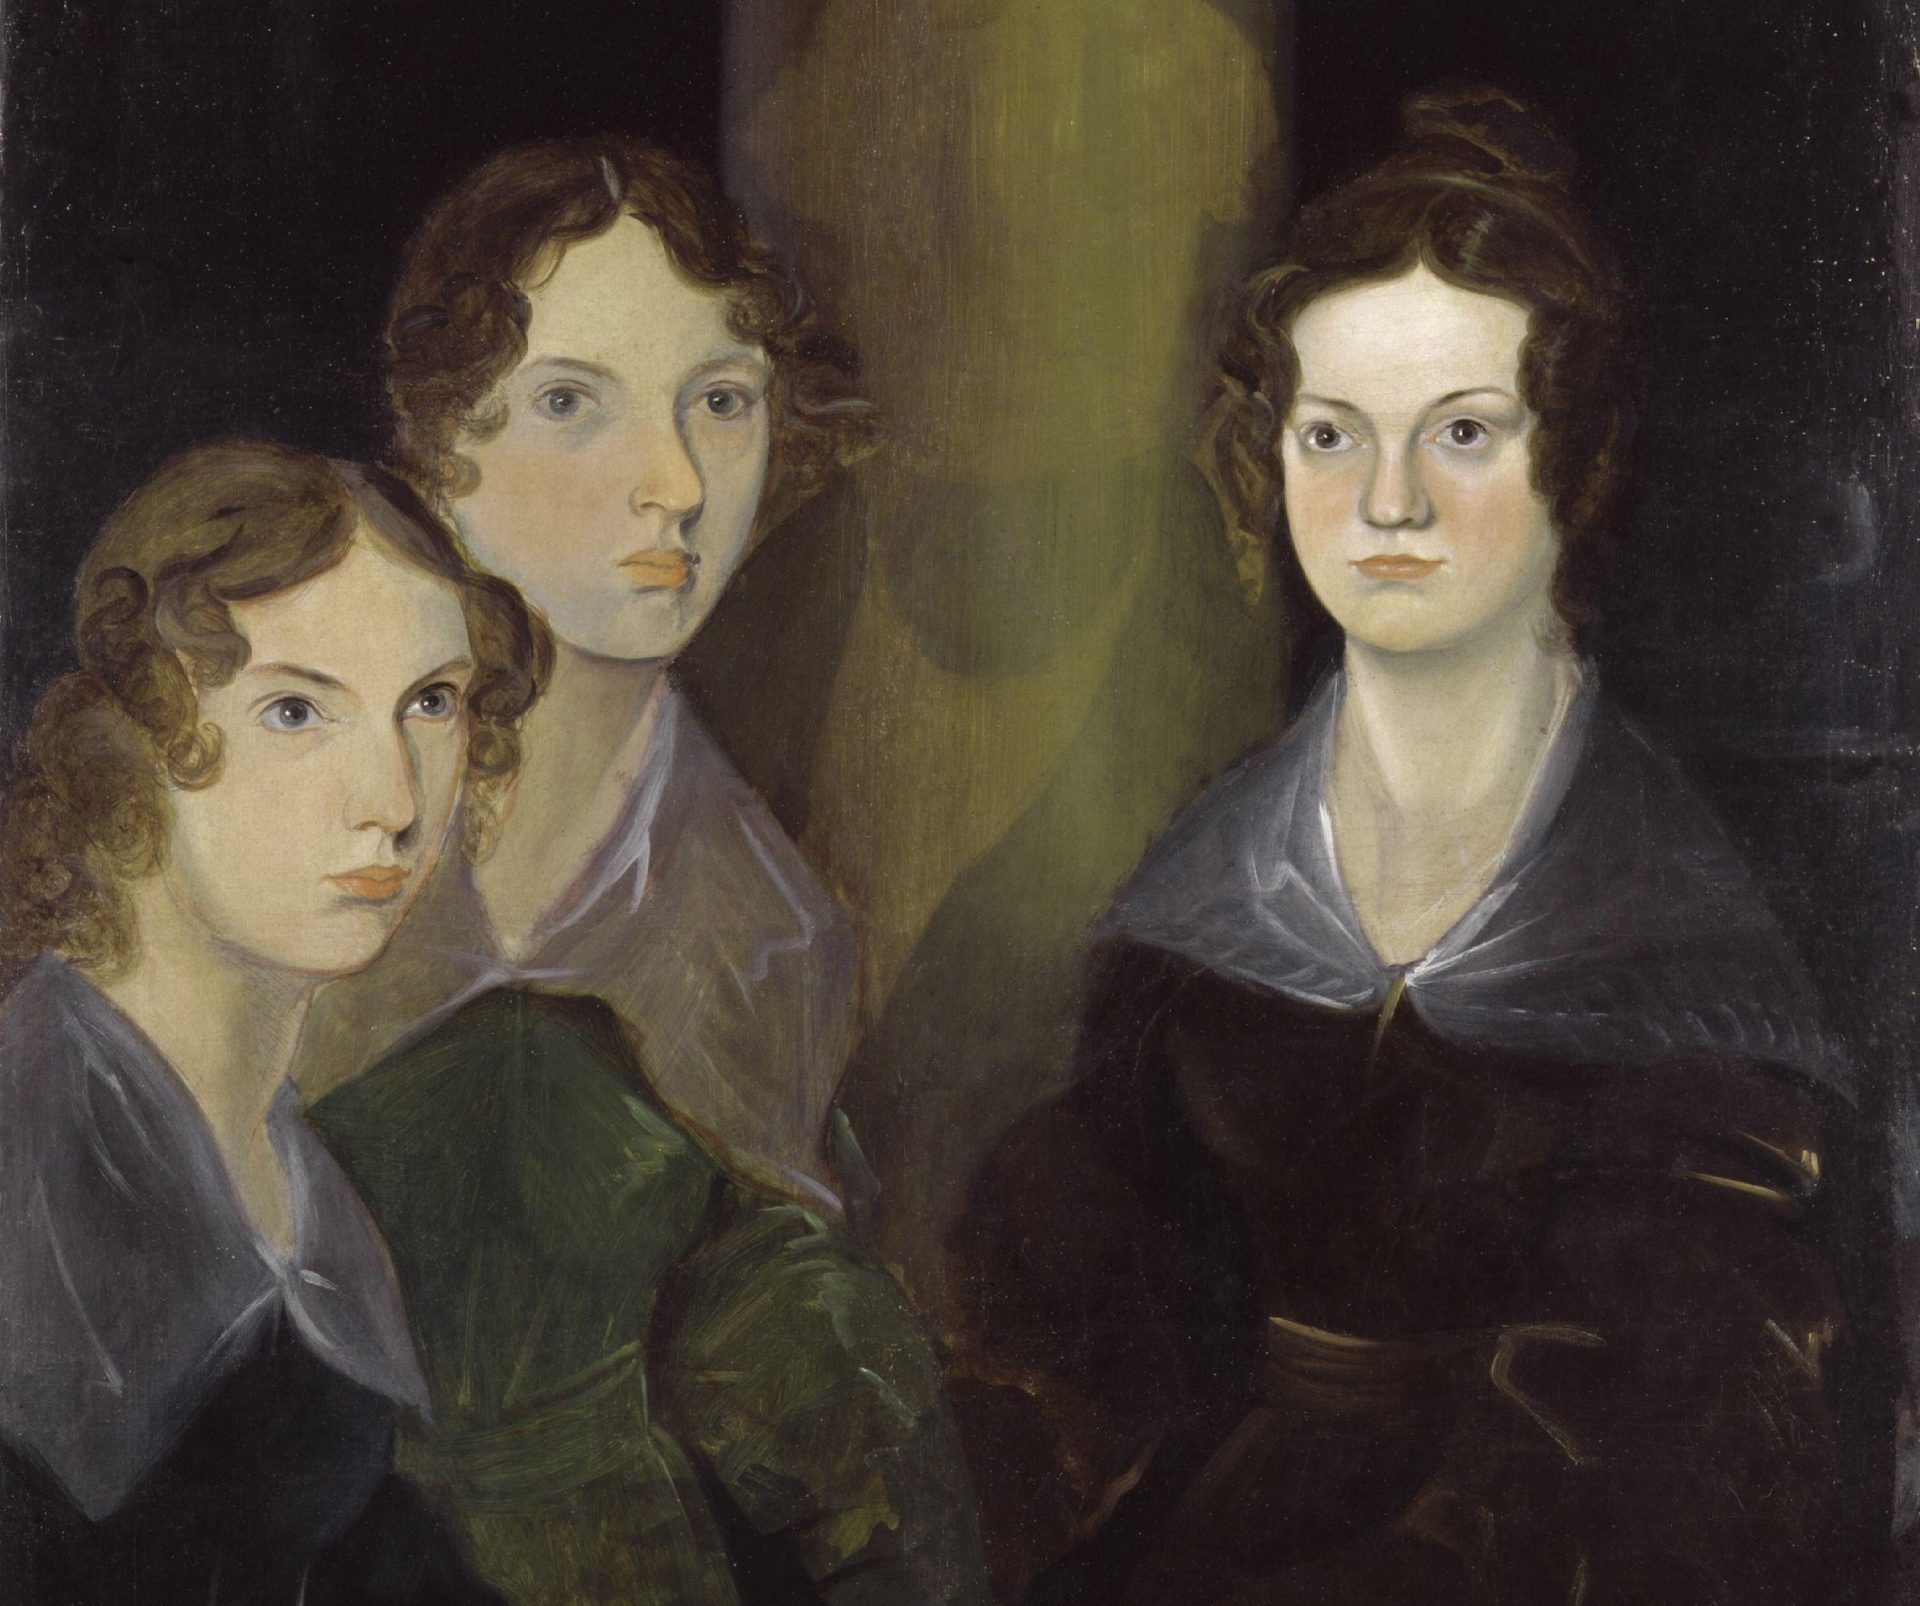 Why You Should Read The Brontë Sisters: Best Novels